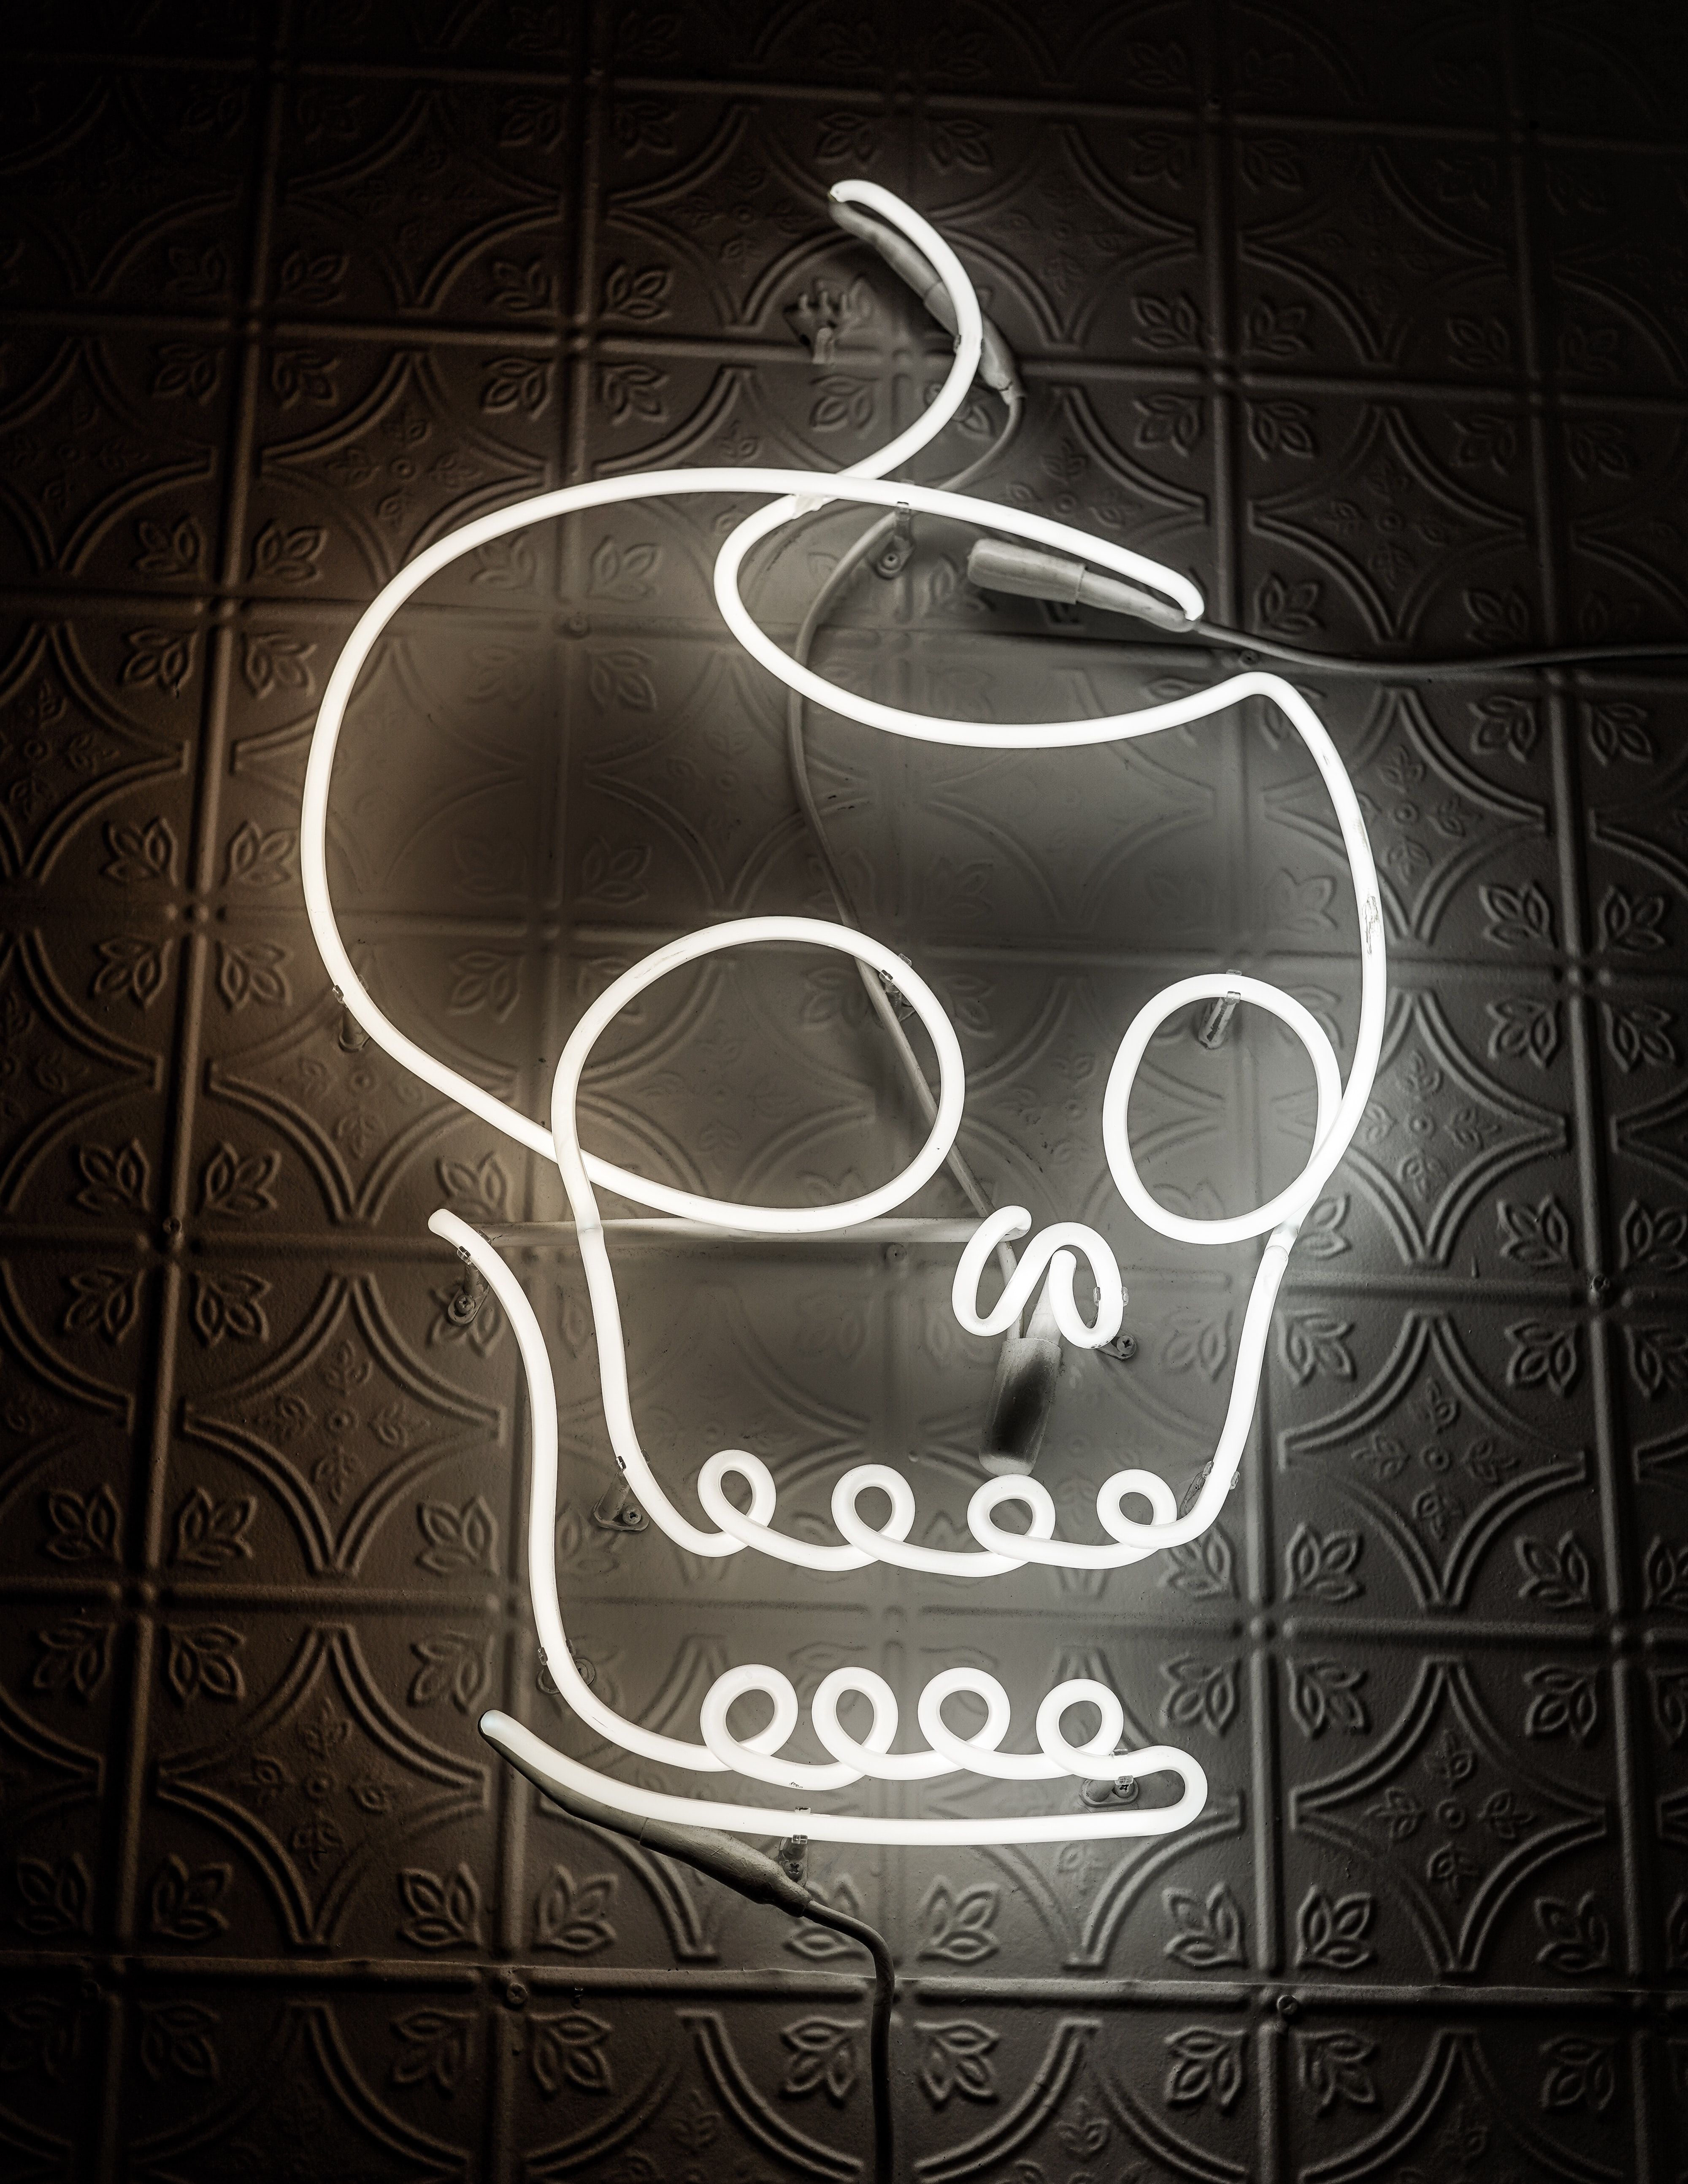 Skull Picture. Download Free Image